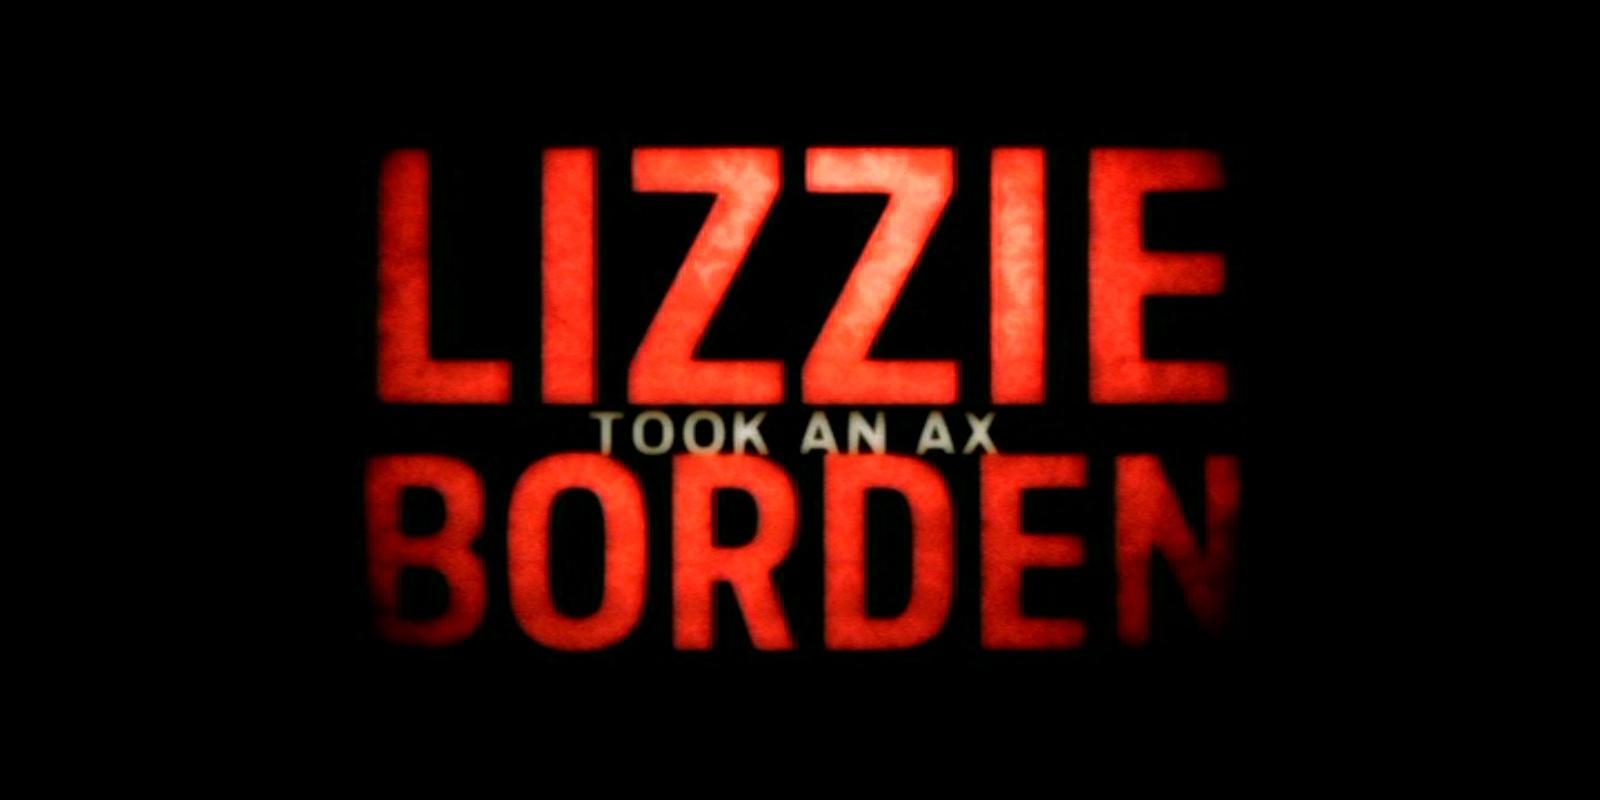 Lizzie Borden Took An Ax wallpapers HD quality